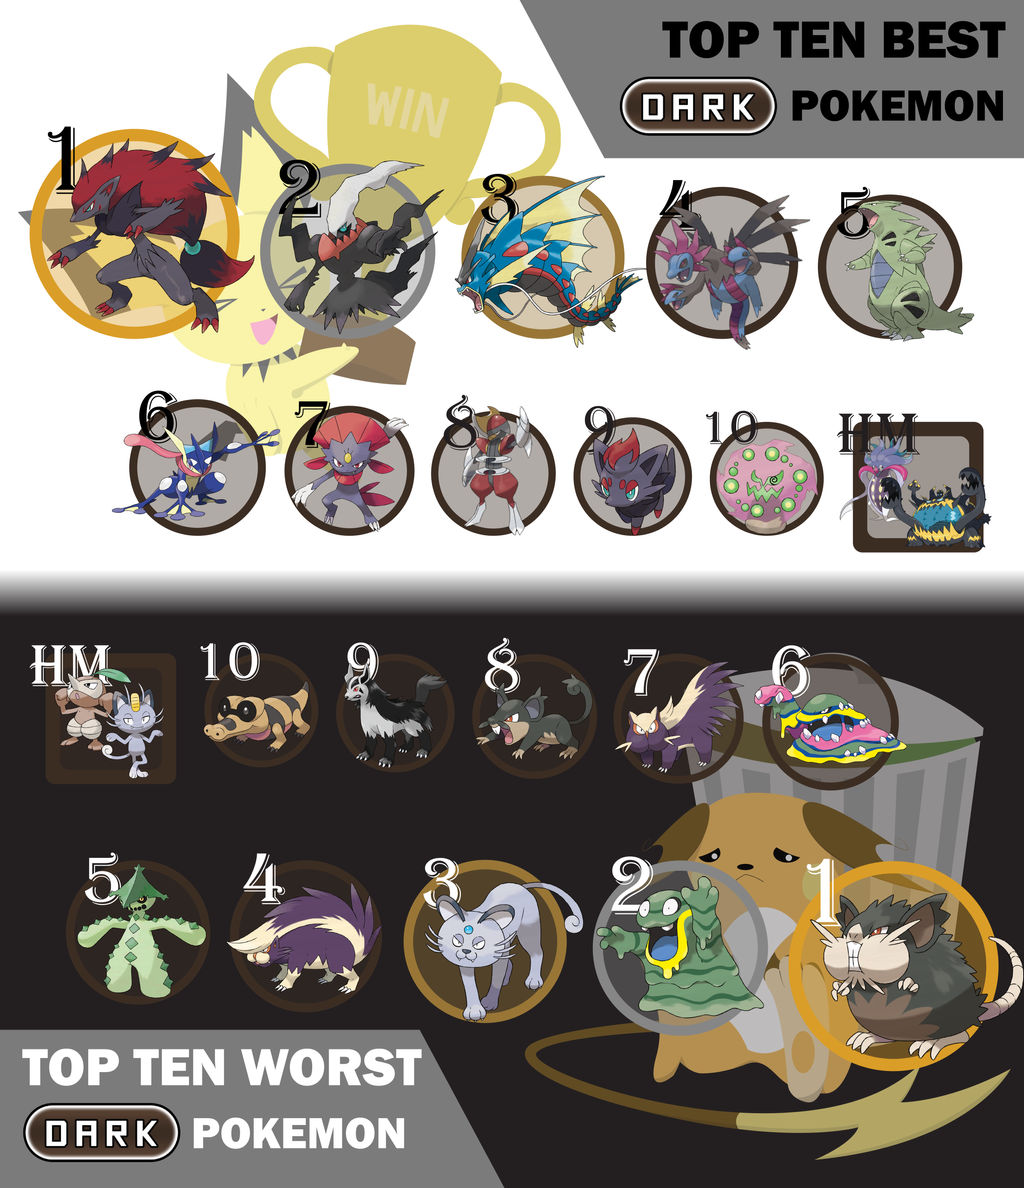 Ranking each new Pokémon with unique type combinations from worse to best